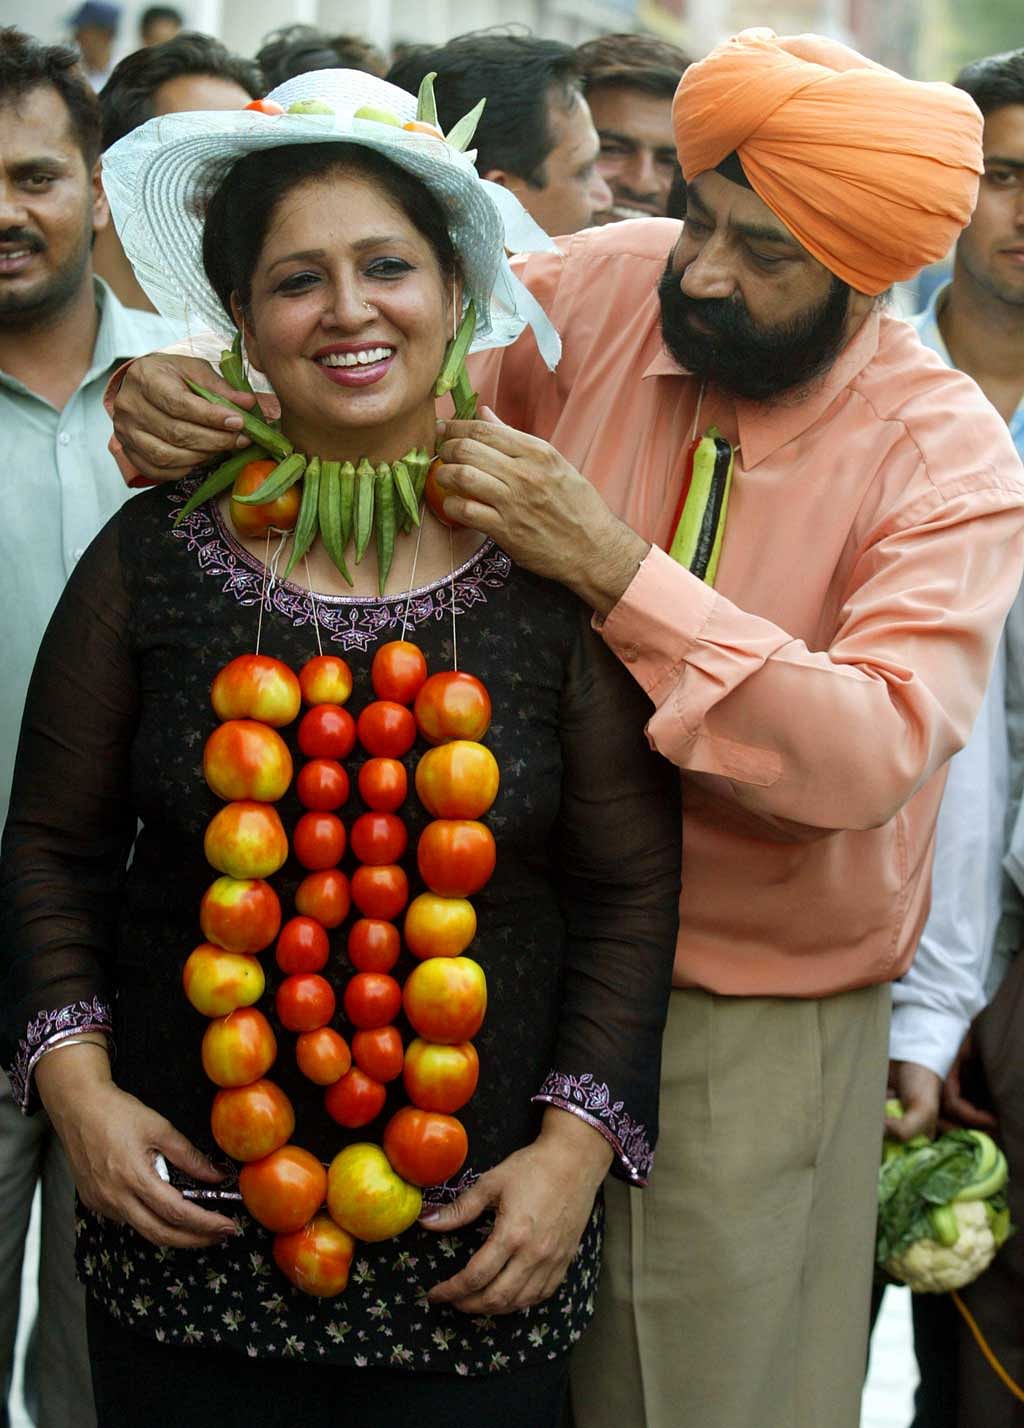 Historically, onions are the most nightmarish vegetable for Indian politicians. Here’s why.